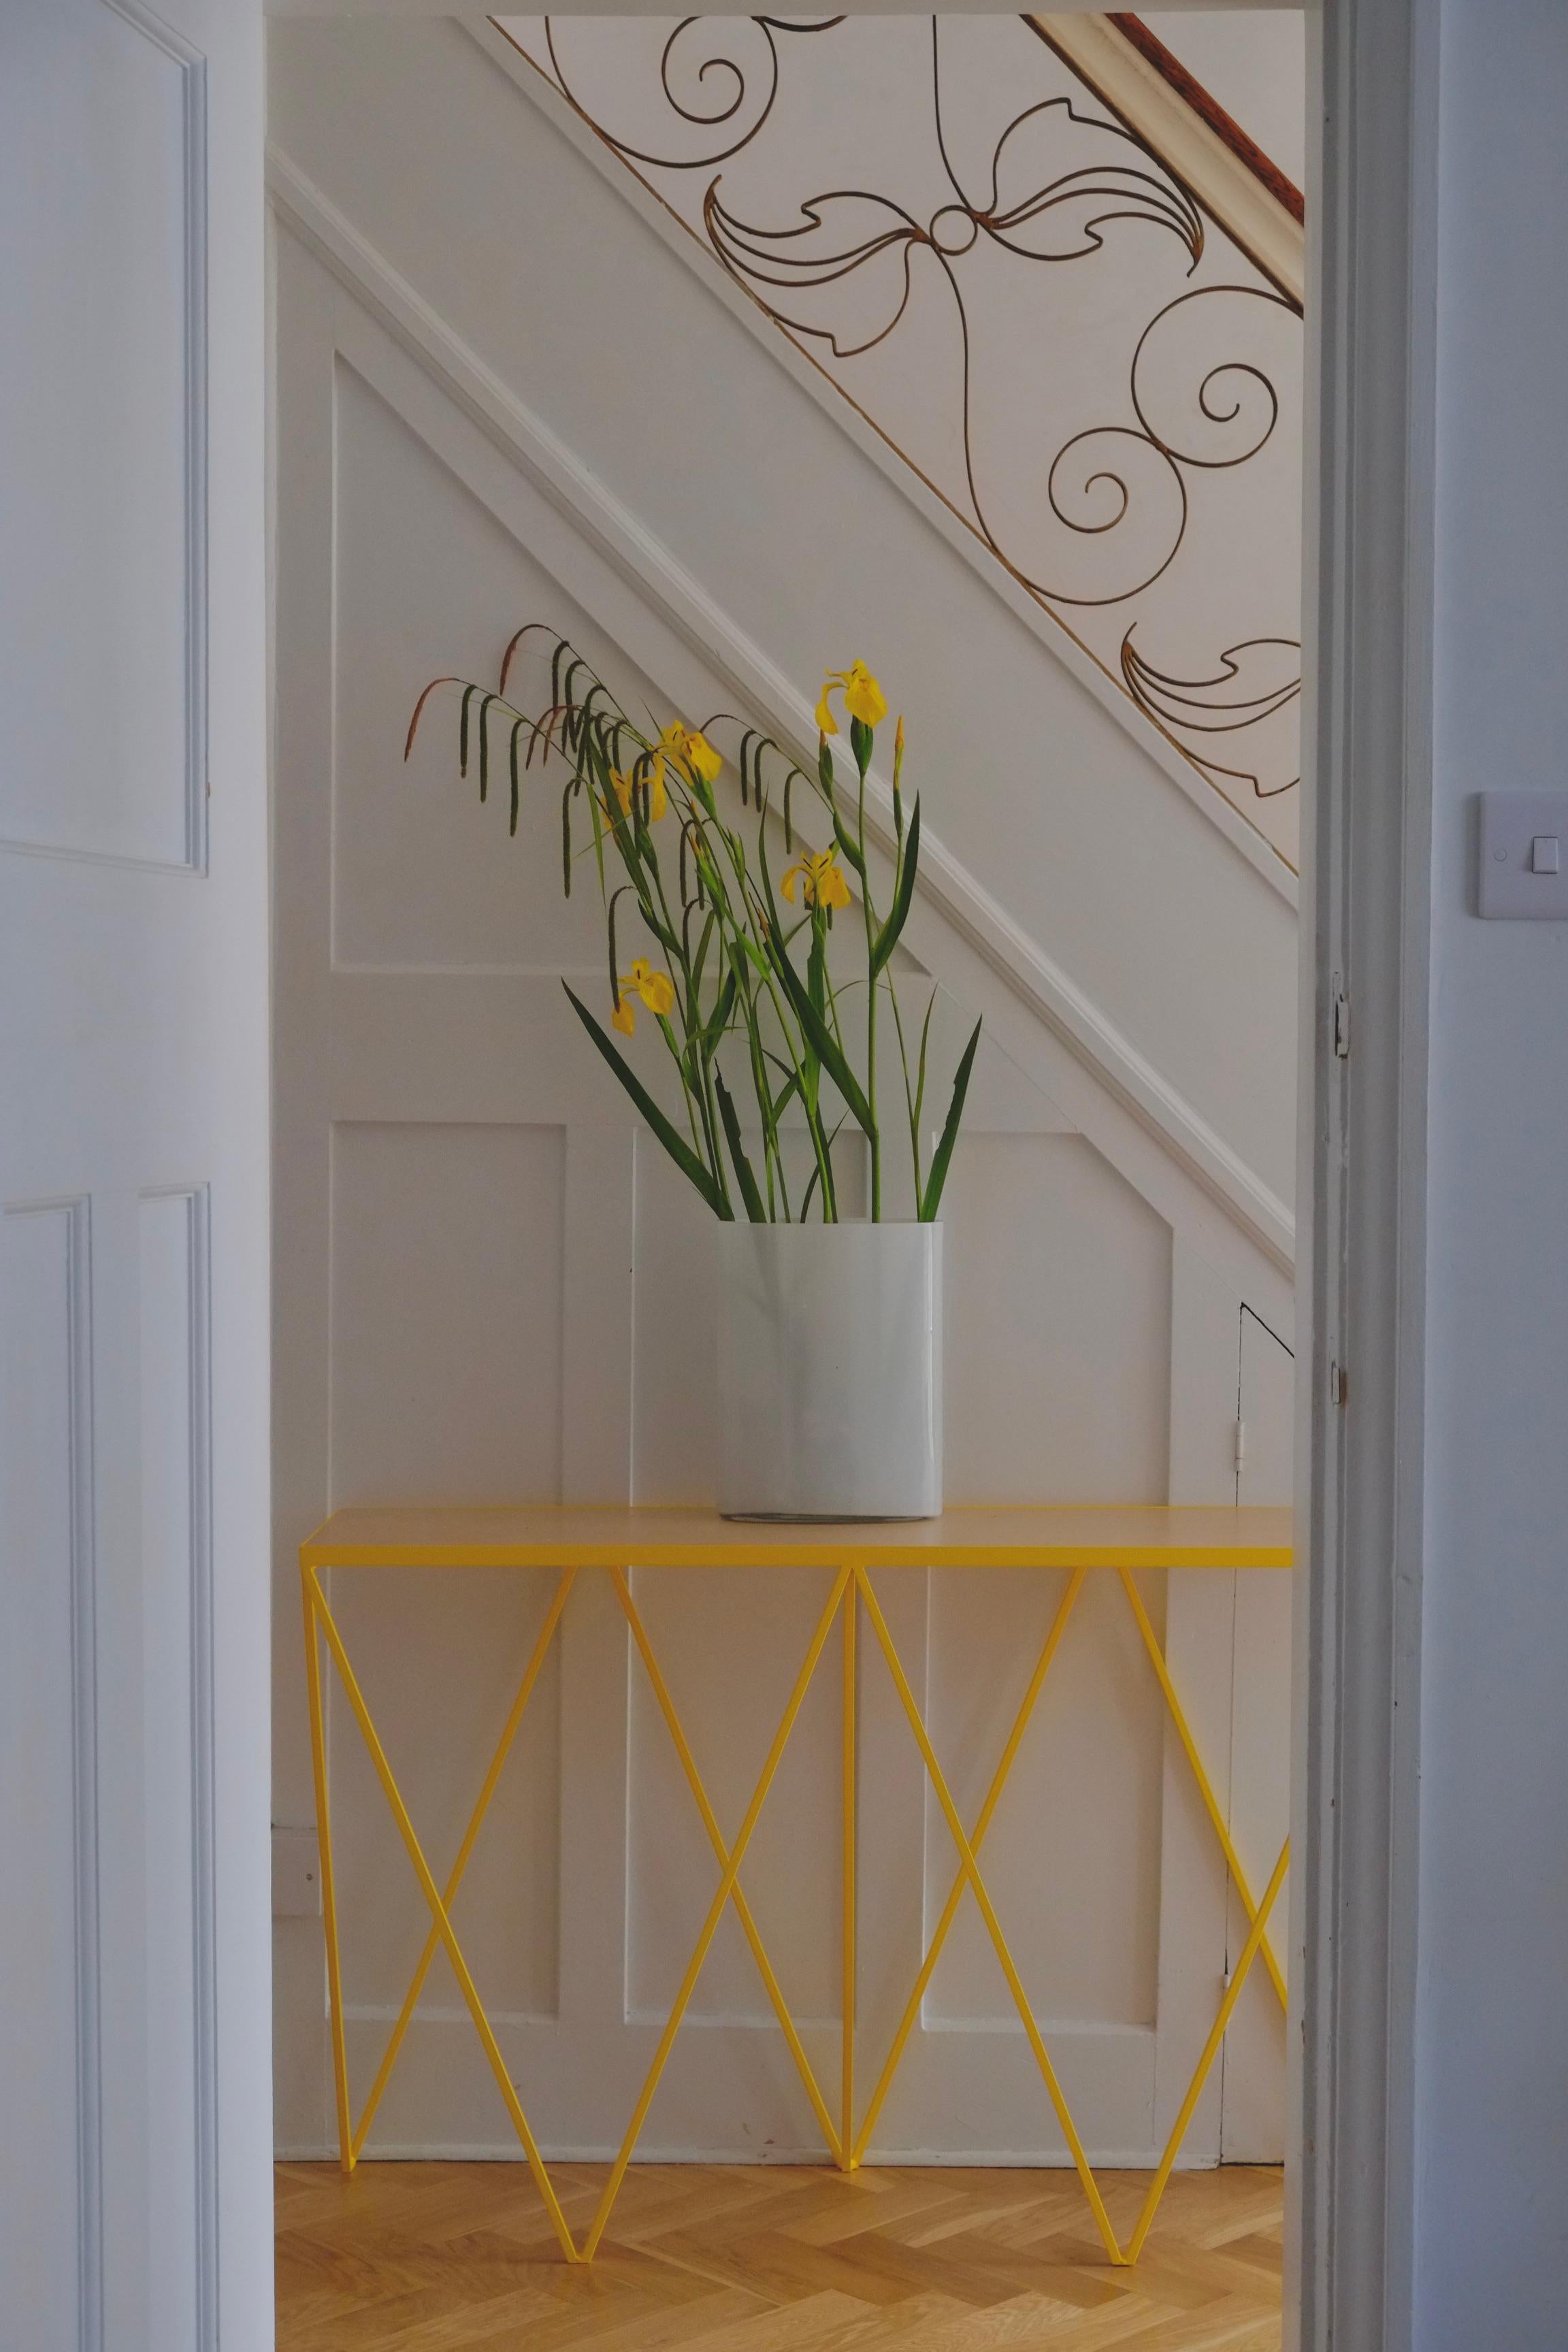 This Giraffe console table is made with a yellow powder-coated steel frame and a natural granite stone top. This luxury console has been designed to be geometric and compact with beautiful proportions. A perfect statement piece for the hallway or